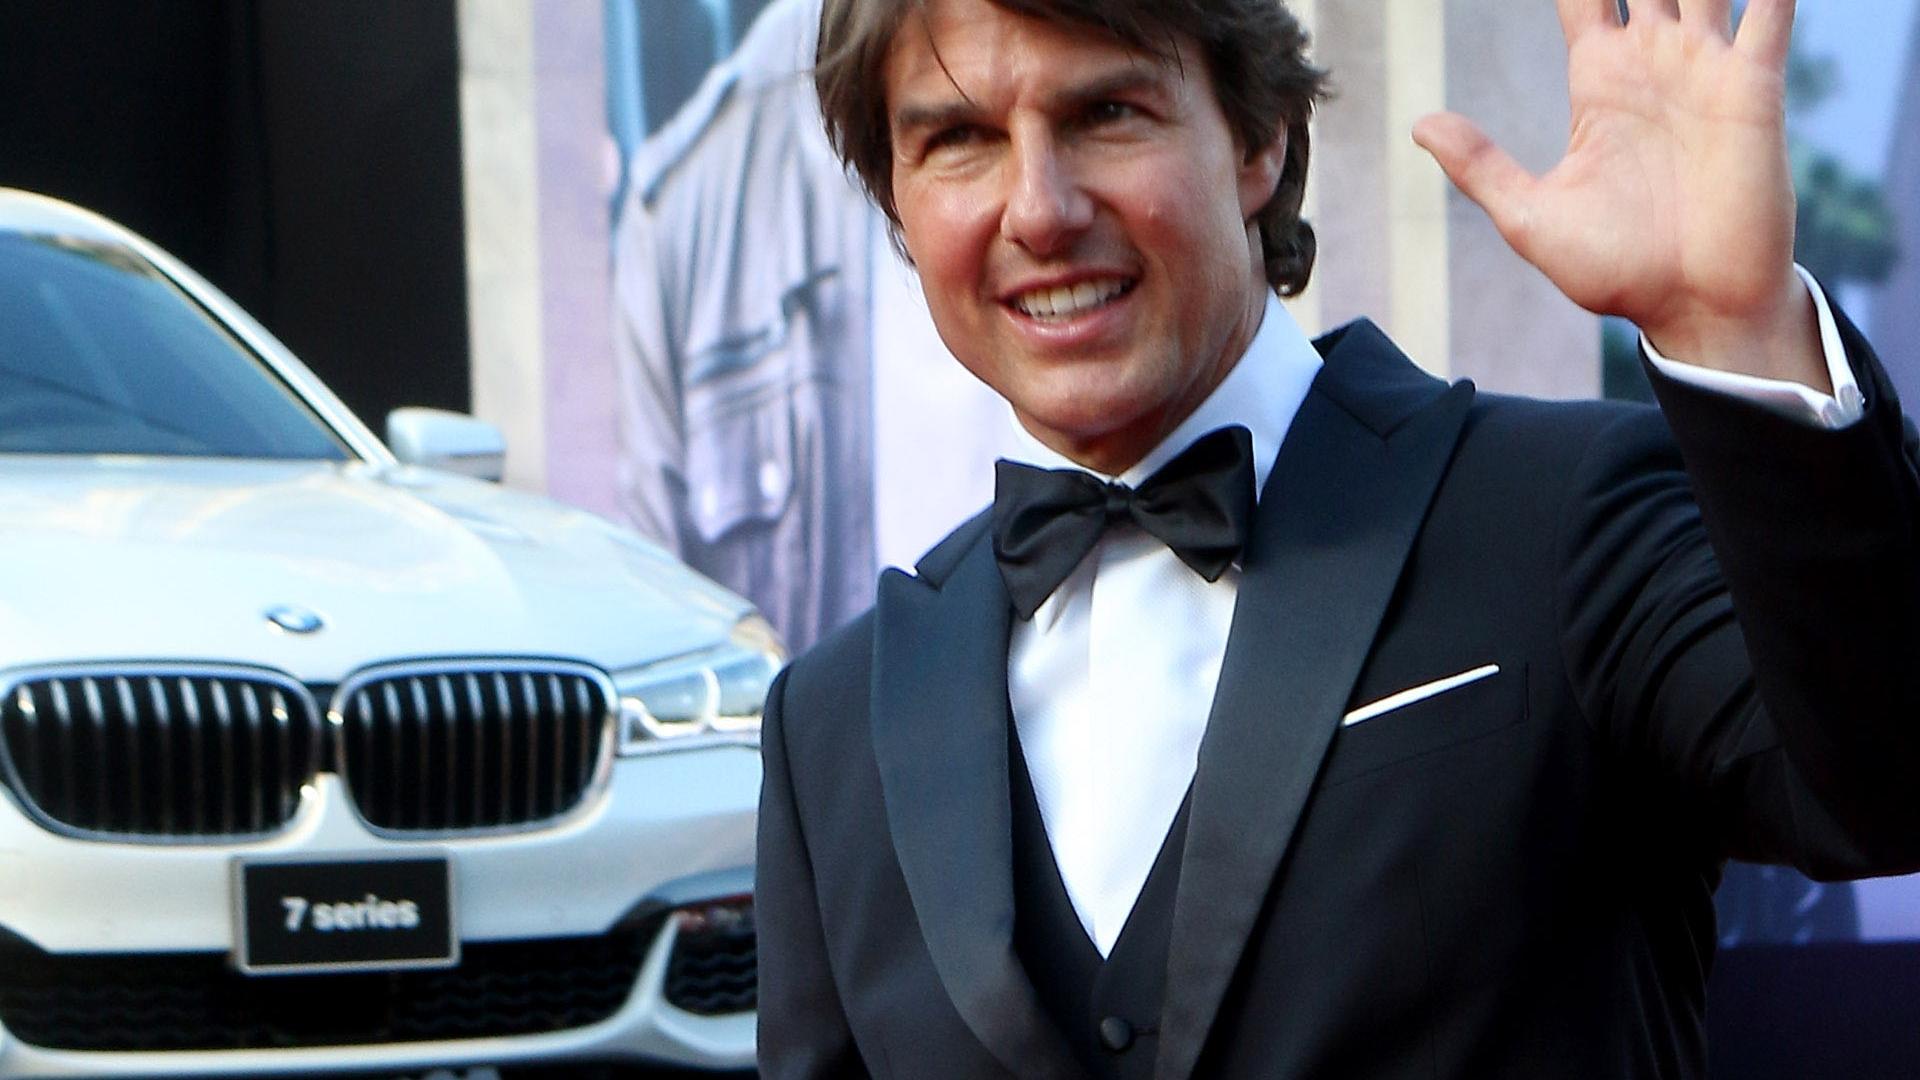 Reports: Tom Cruise injured in filming 'Mission: Impossible' stunt